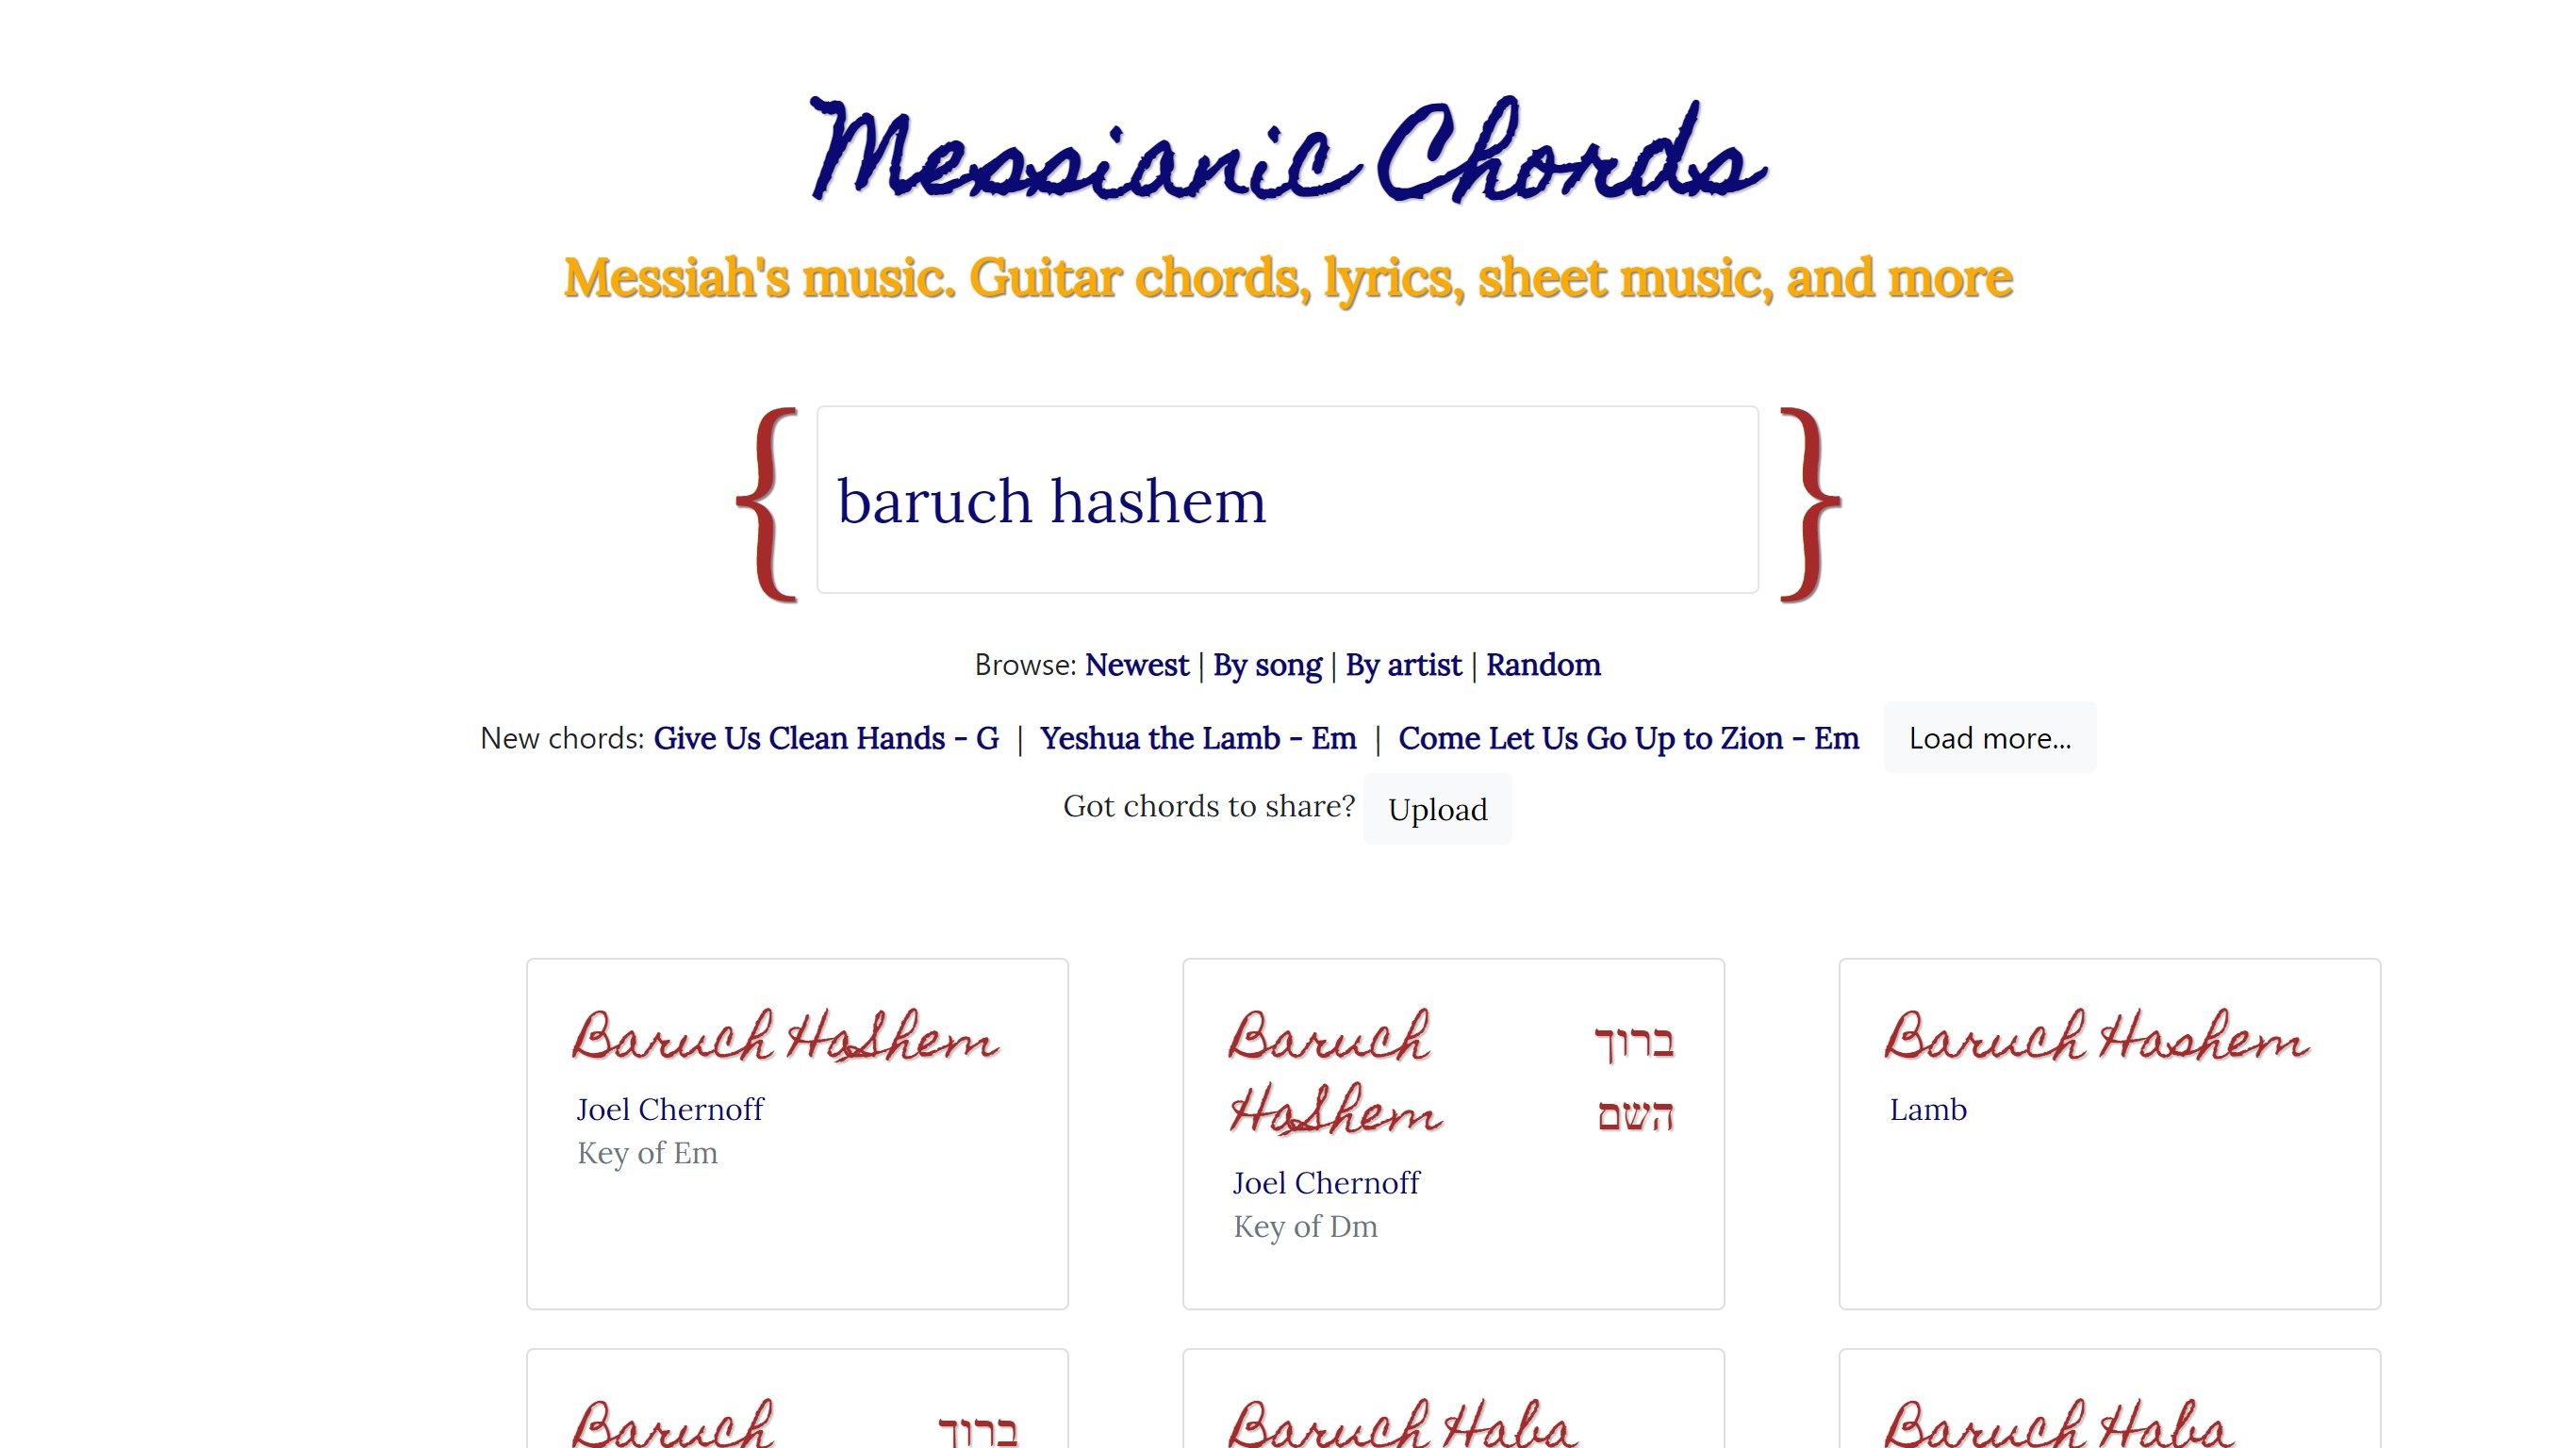 Messianic Chords